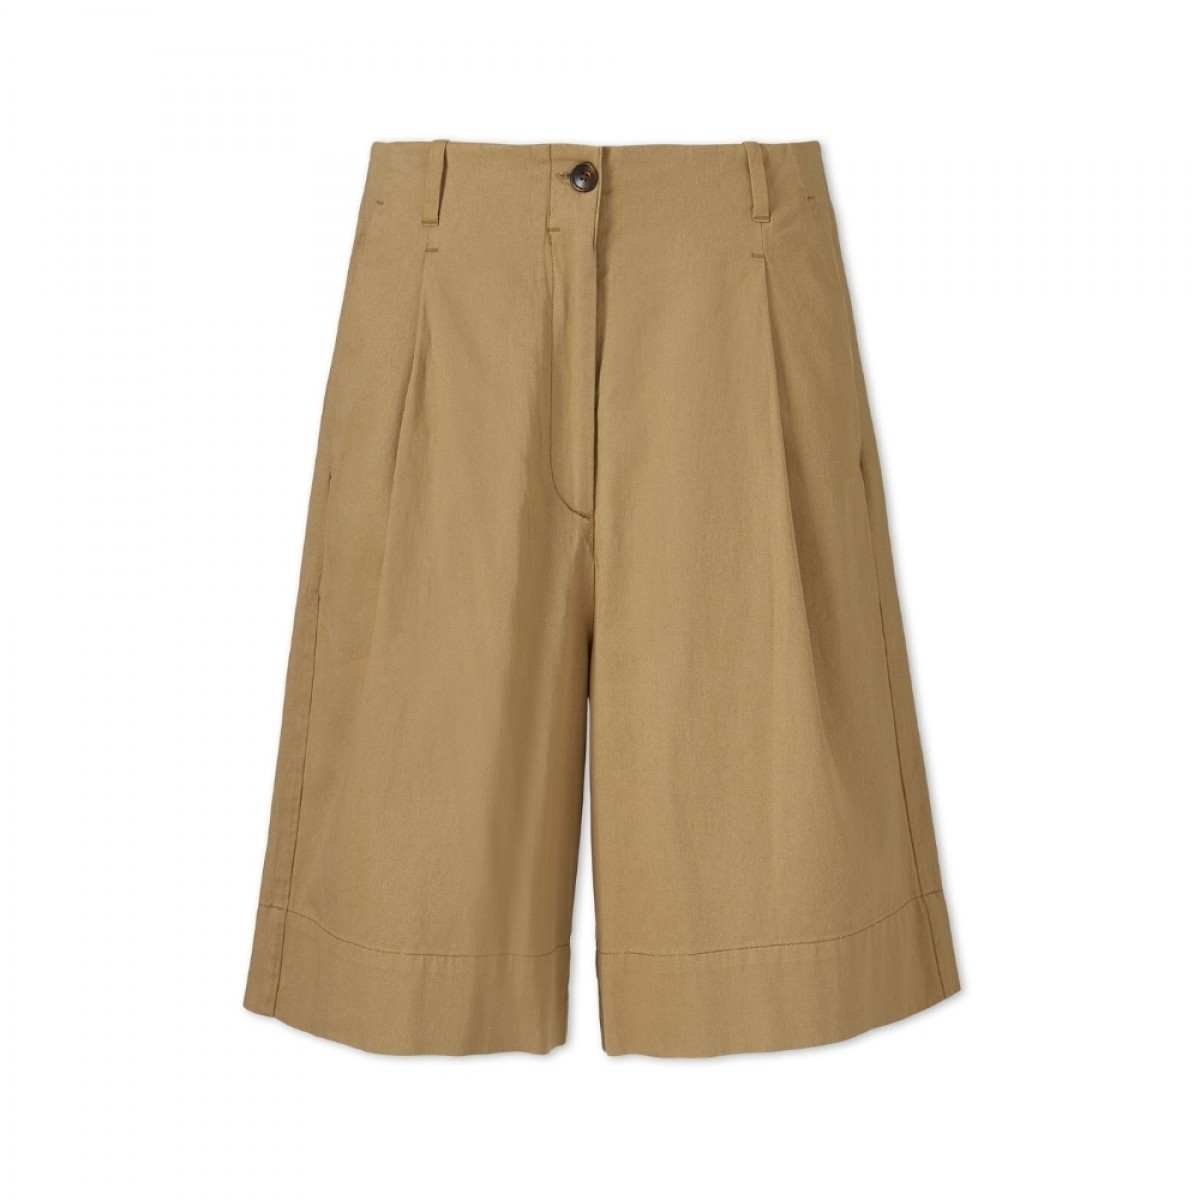 willy shorts - caramel - front